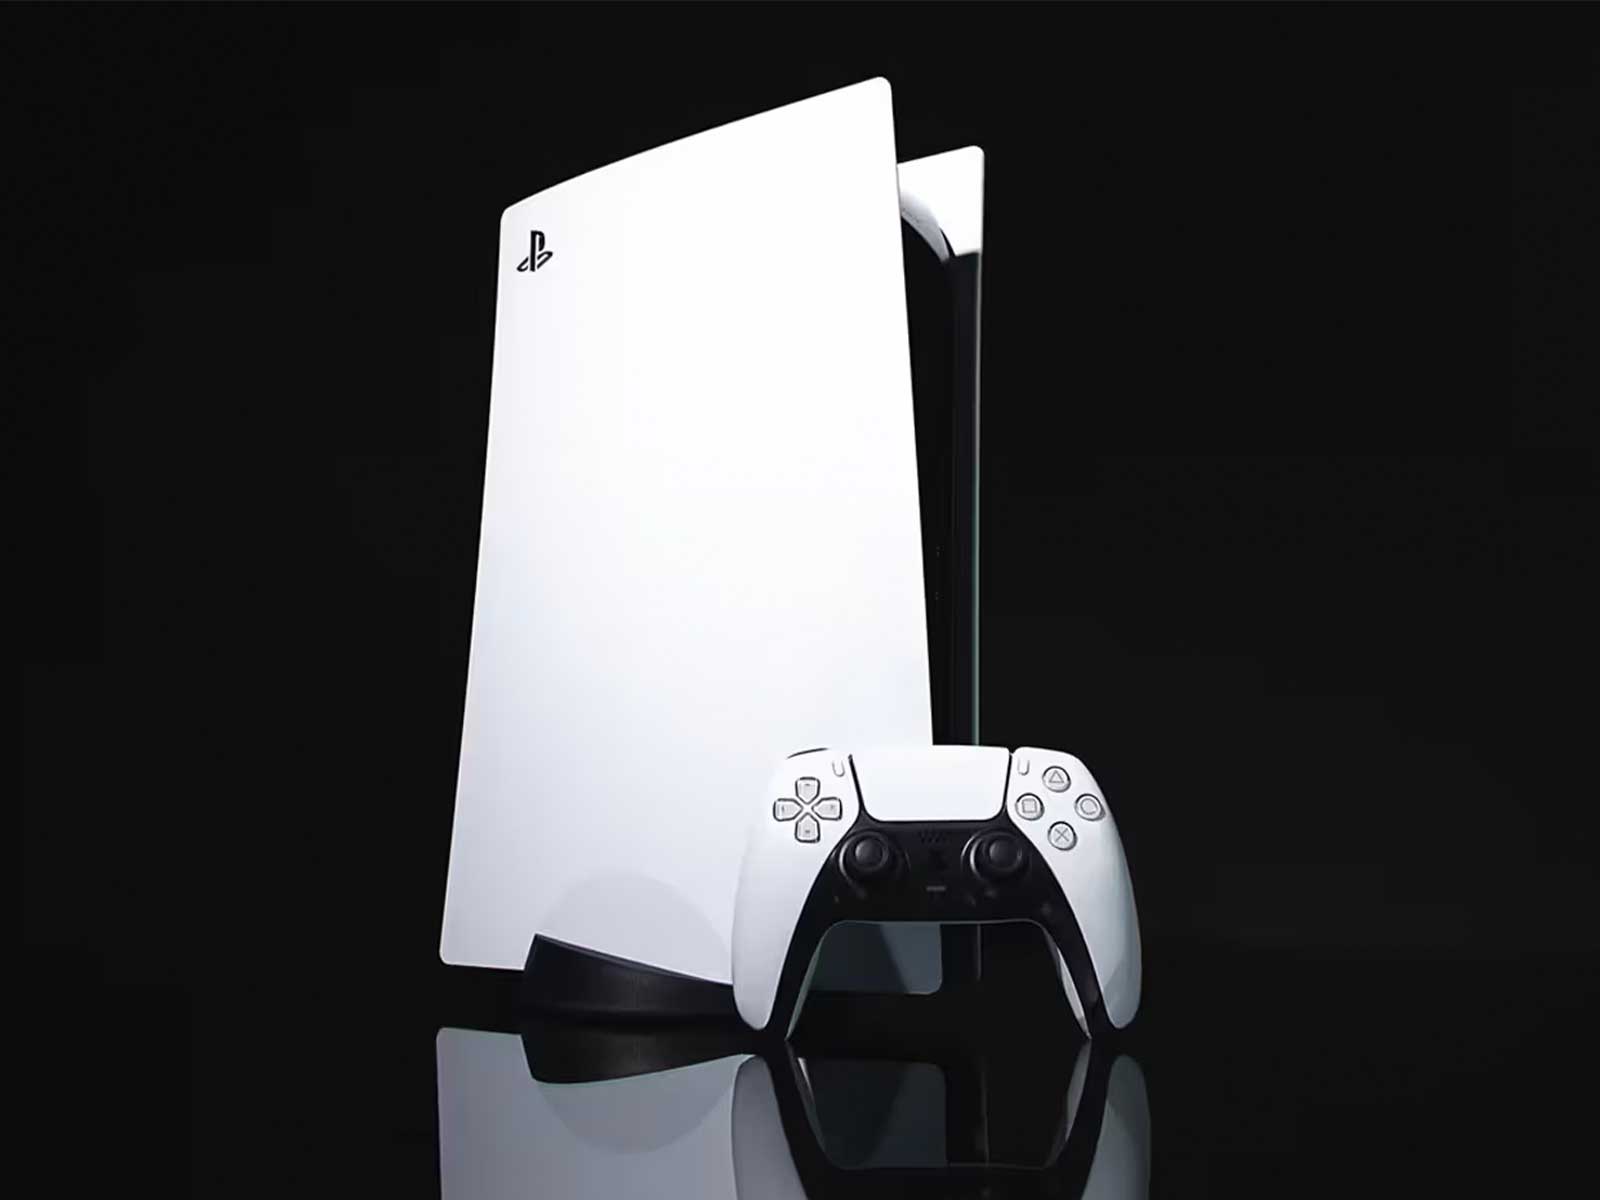 PS5 Slim: Microsoft leaks release date and retail price - HIGHXTAR.